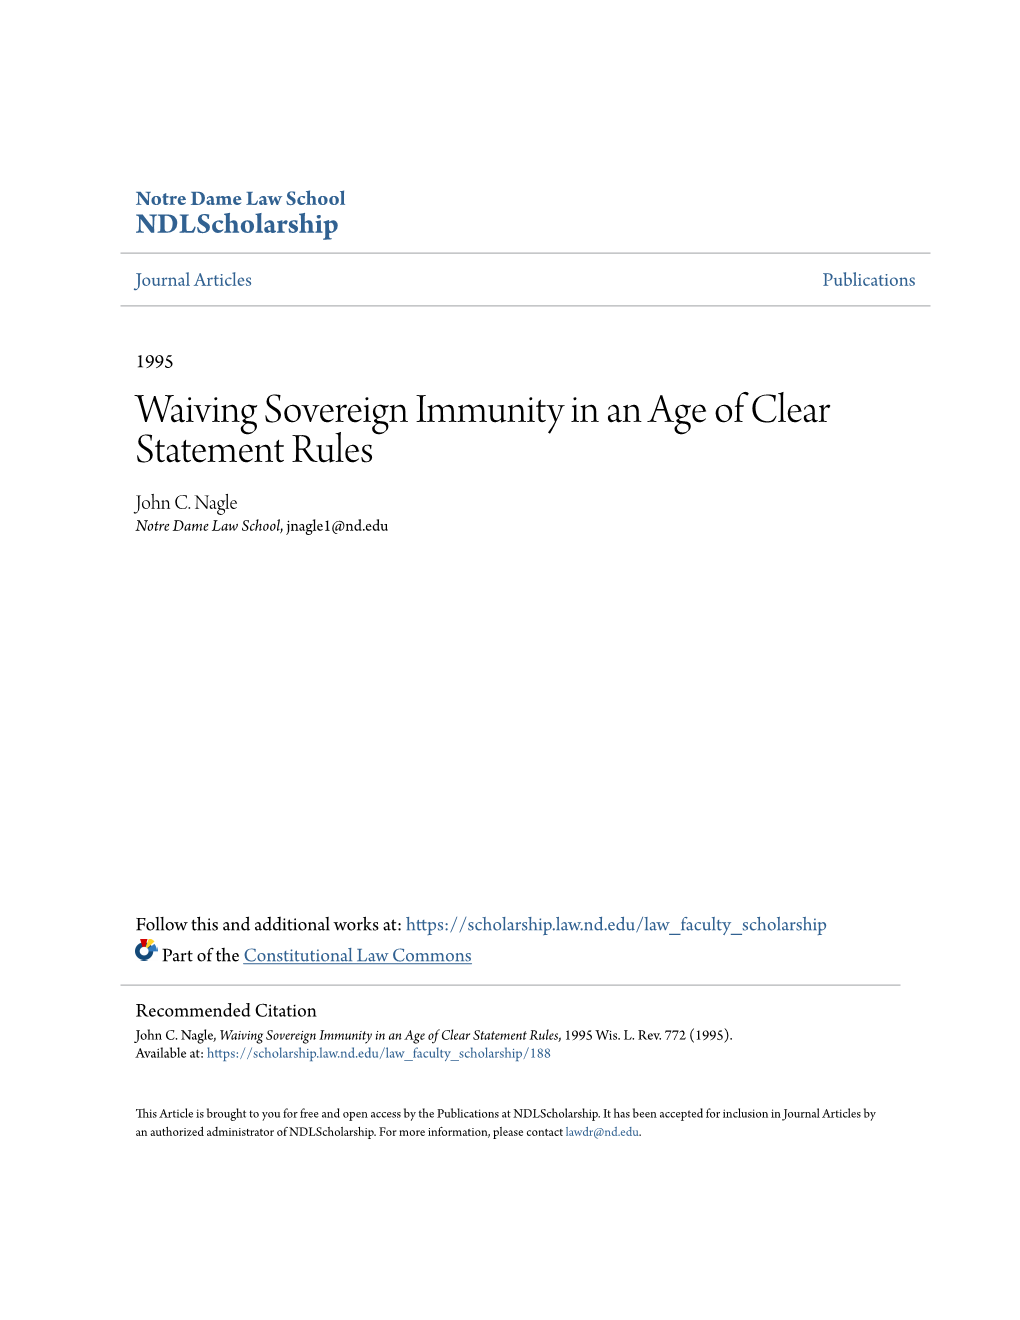 Waiving Sovereign Immunity in an Age of Clear Statement Rules John C